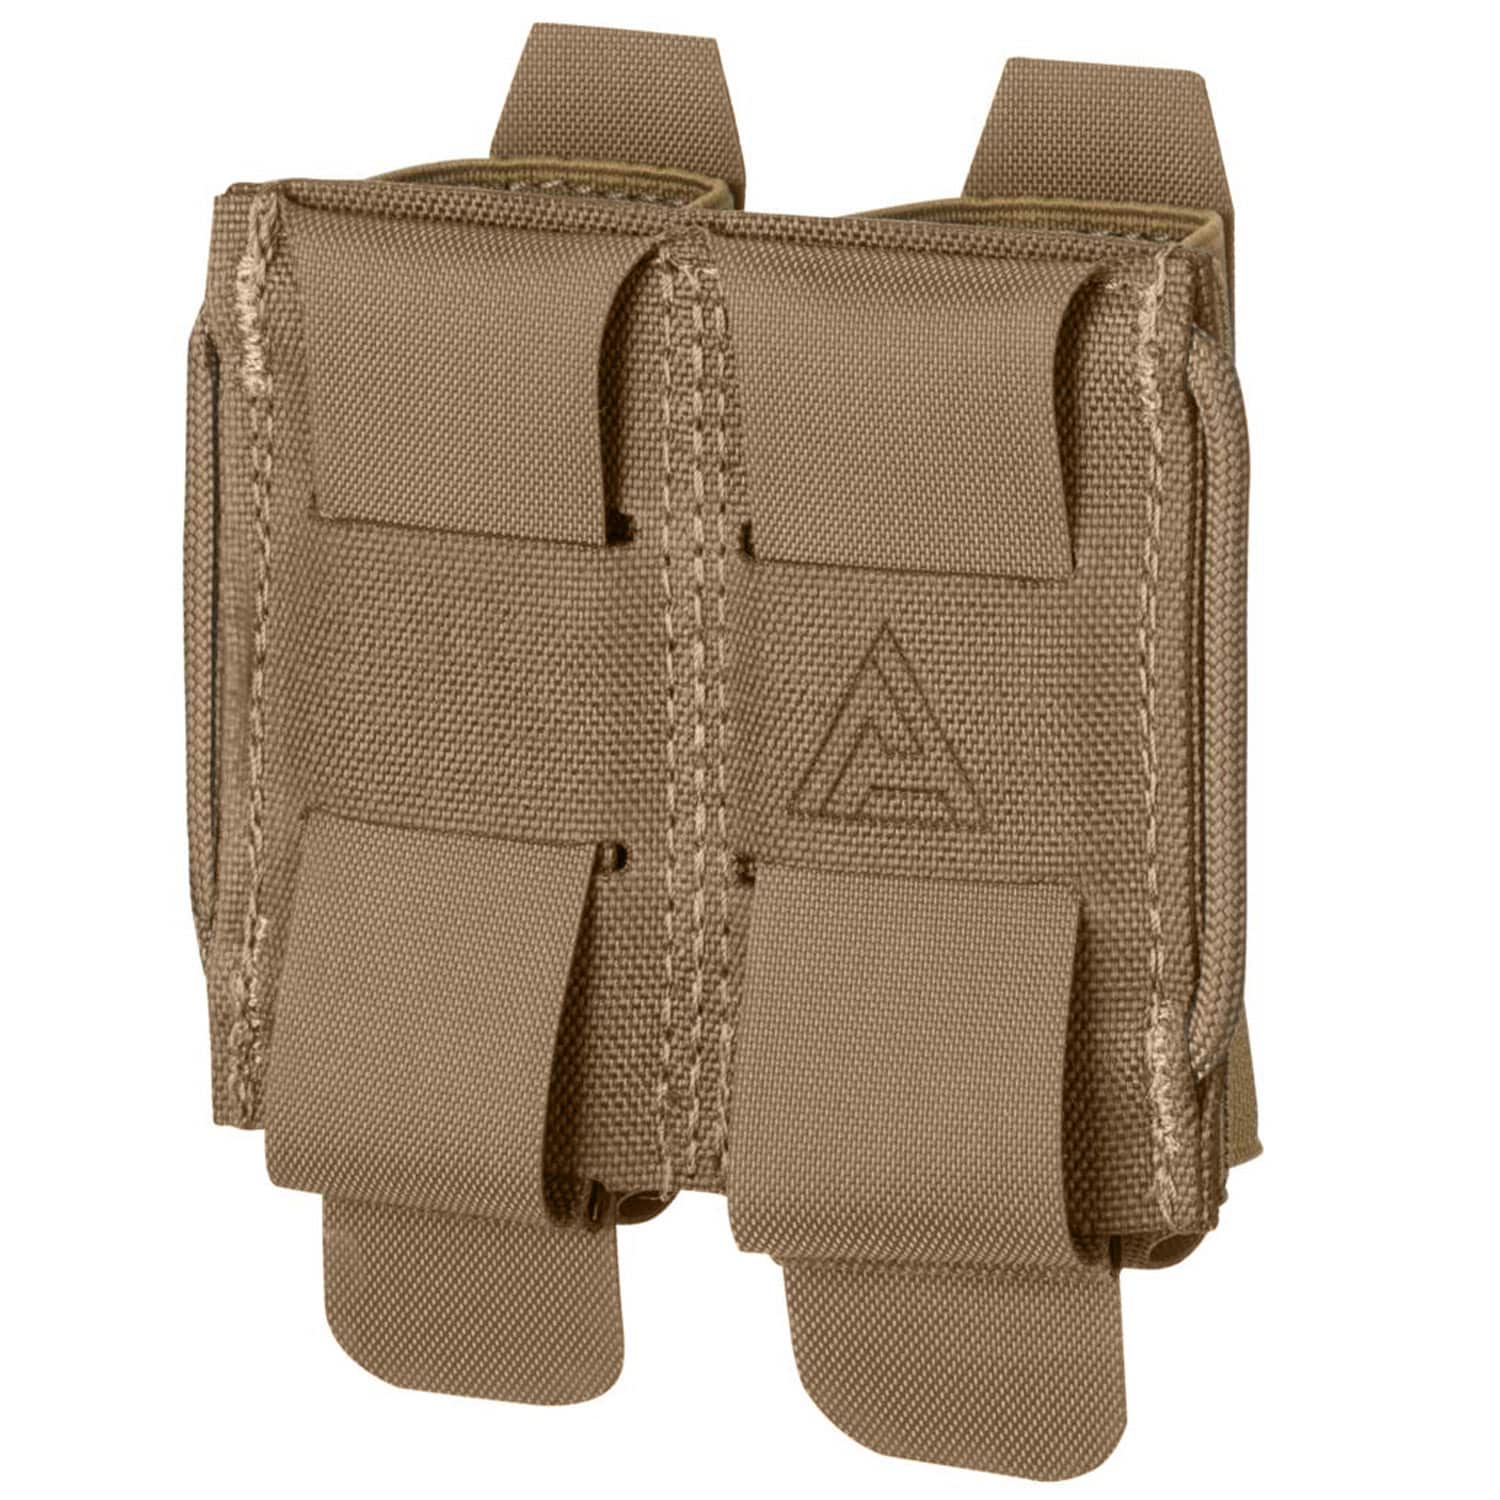 Ładownica Direct Action na magazynki pistoletowe SLICK Pistol Mag Pouch - Coyote Brown